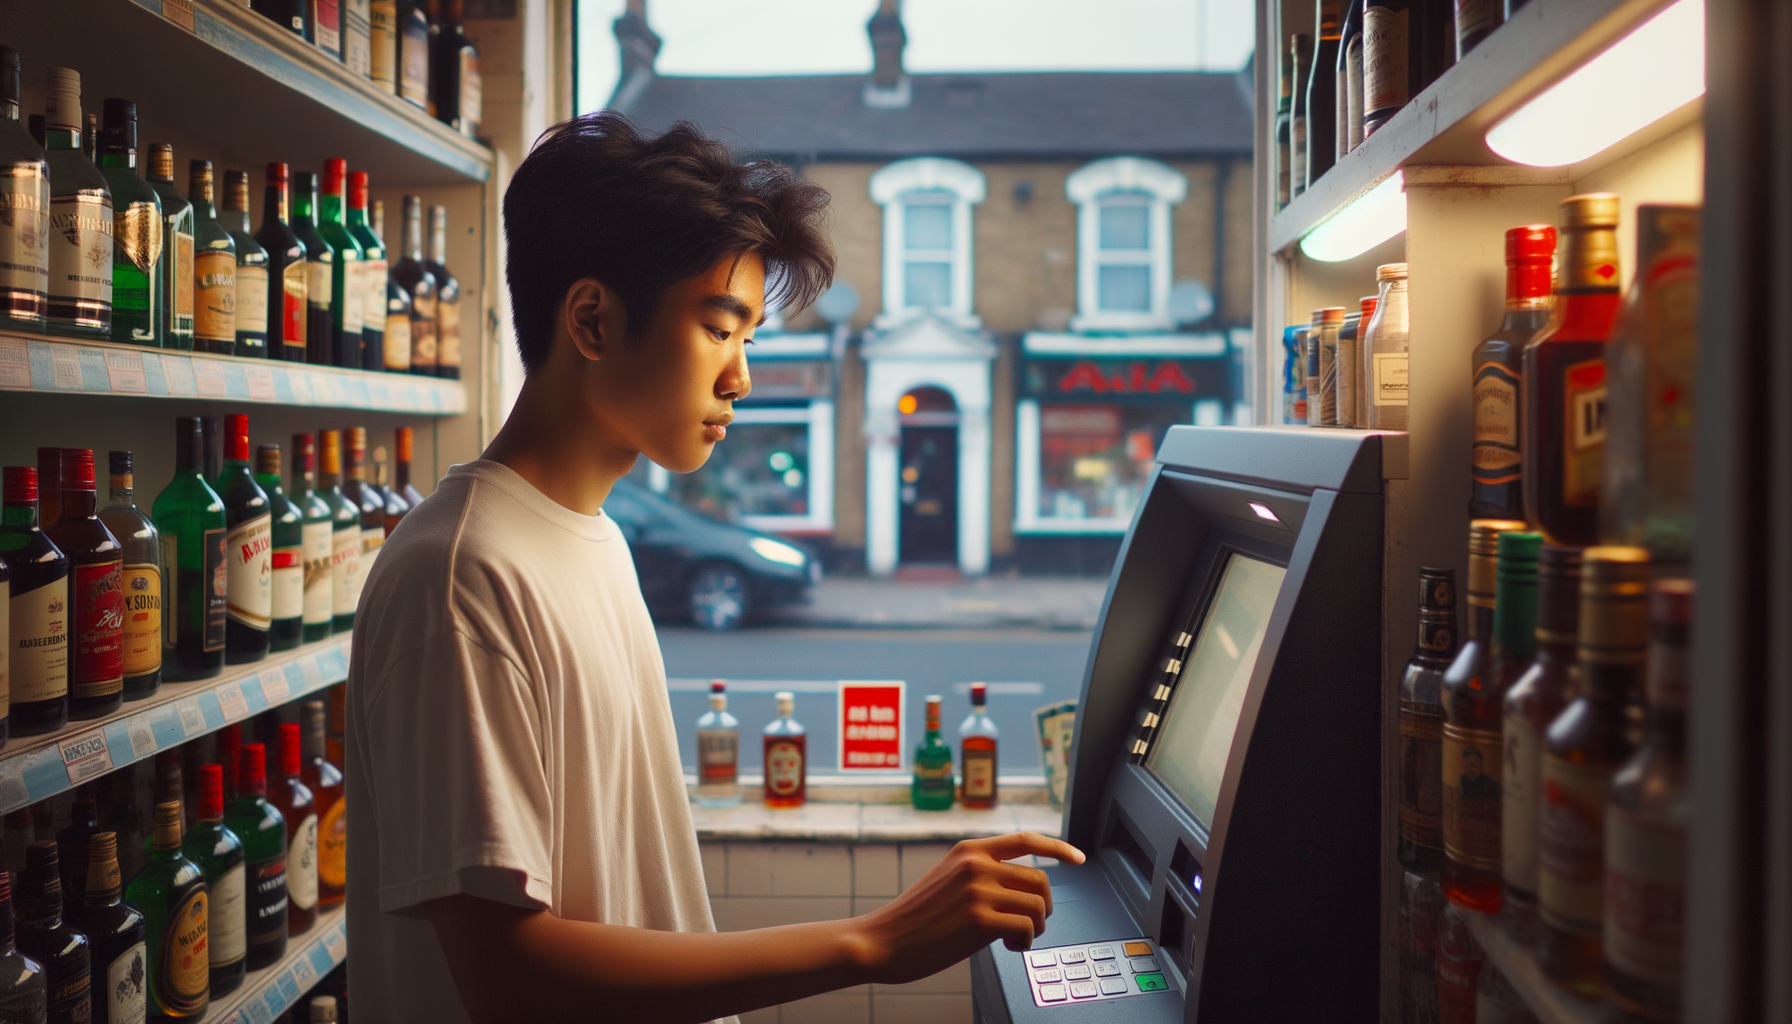 An american young adult male making a withdrawl from ATM machine while standing inside of a poor neighborhood liquor store